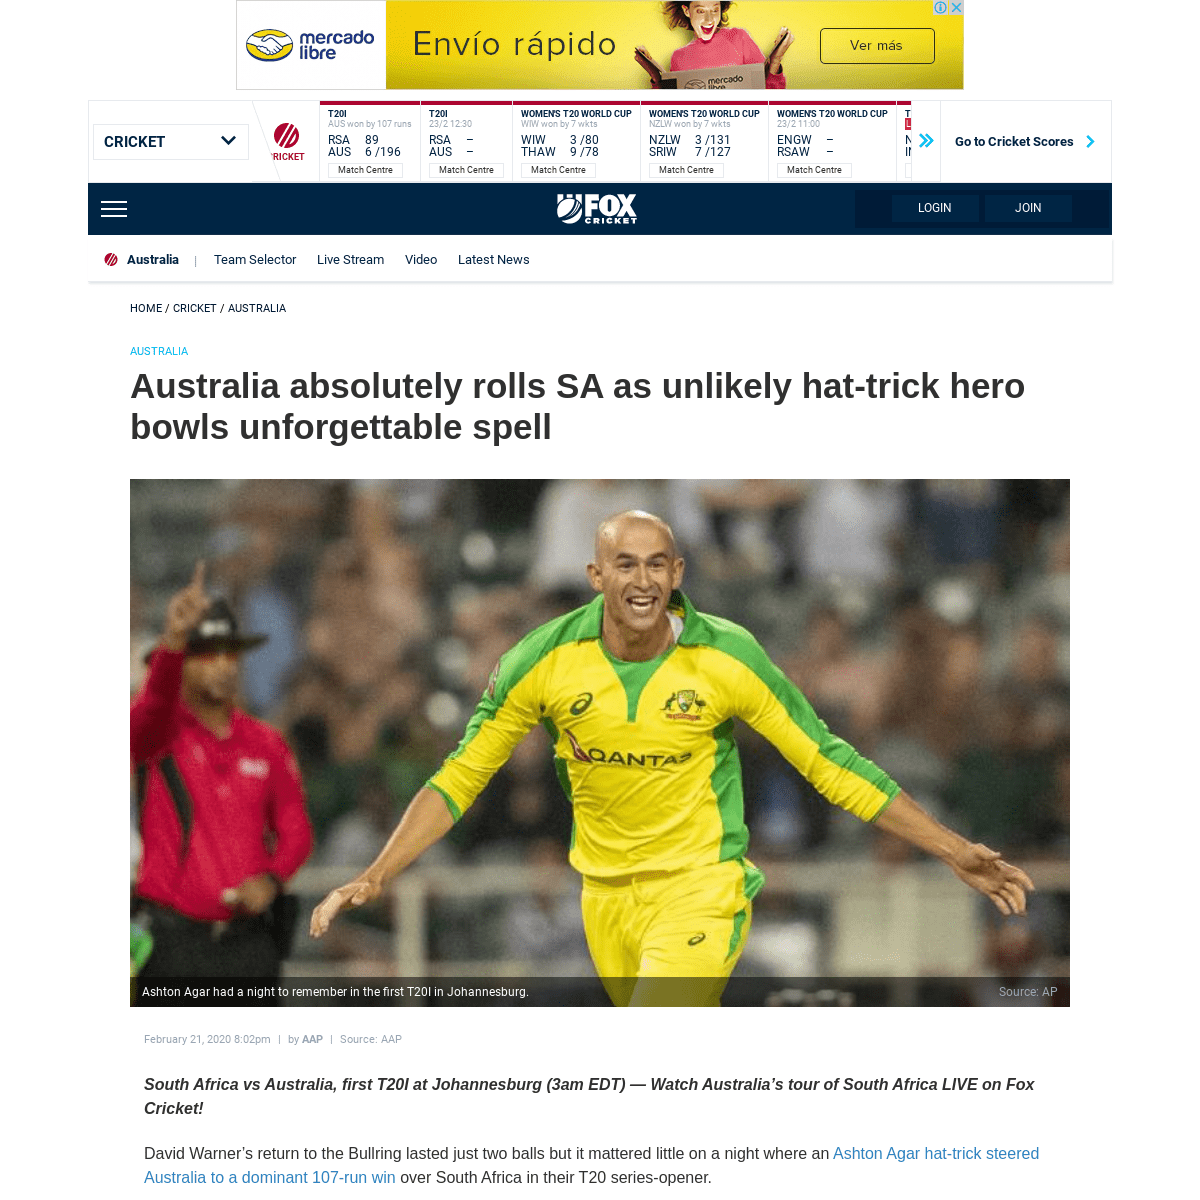 A complete backup of www.foxsports.com.au/cricket/australia/cricket-australia-vs-south-africa-first-t20-live-scores-start-time-h